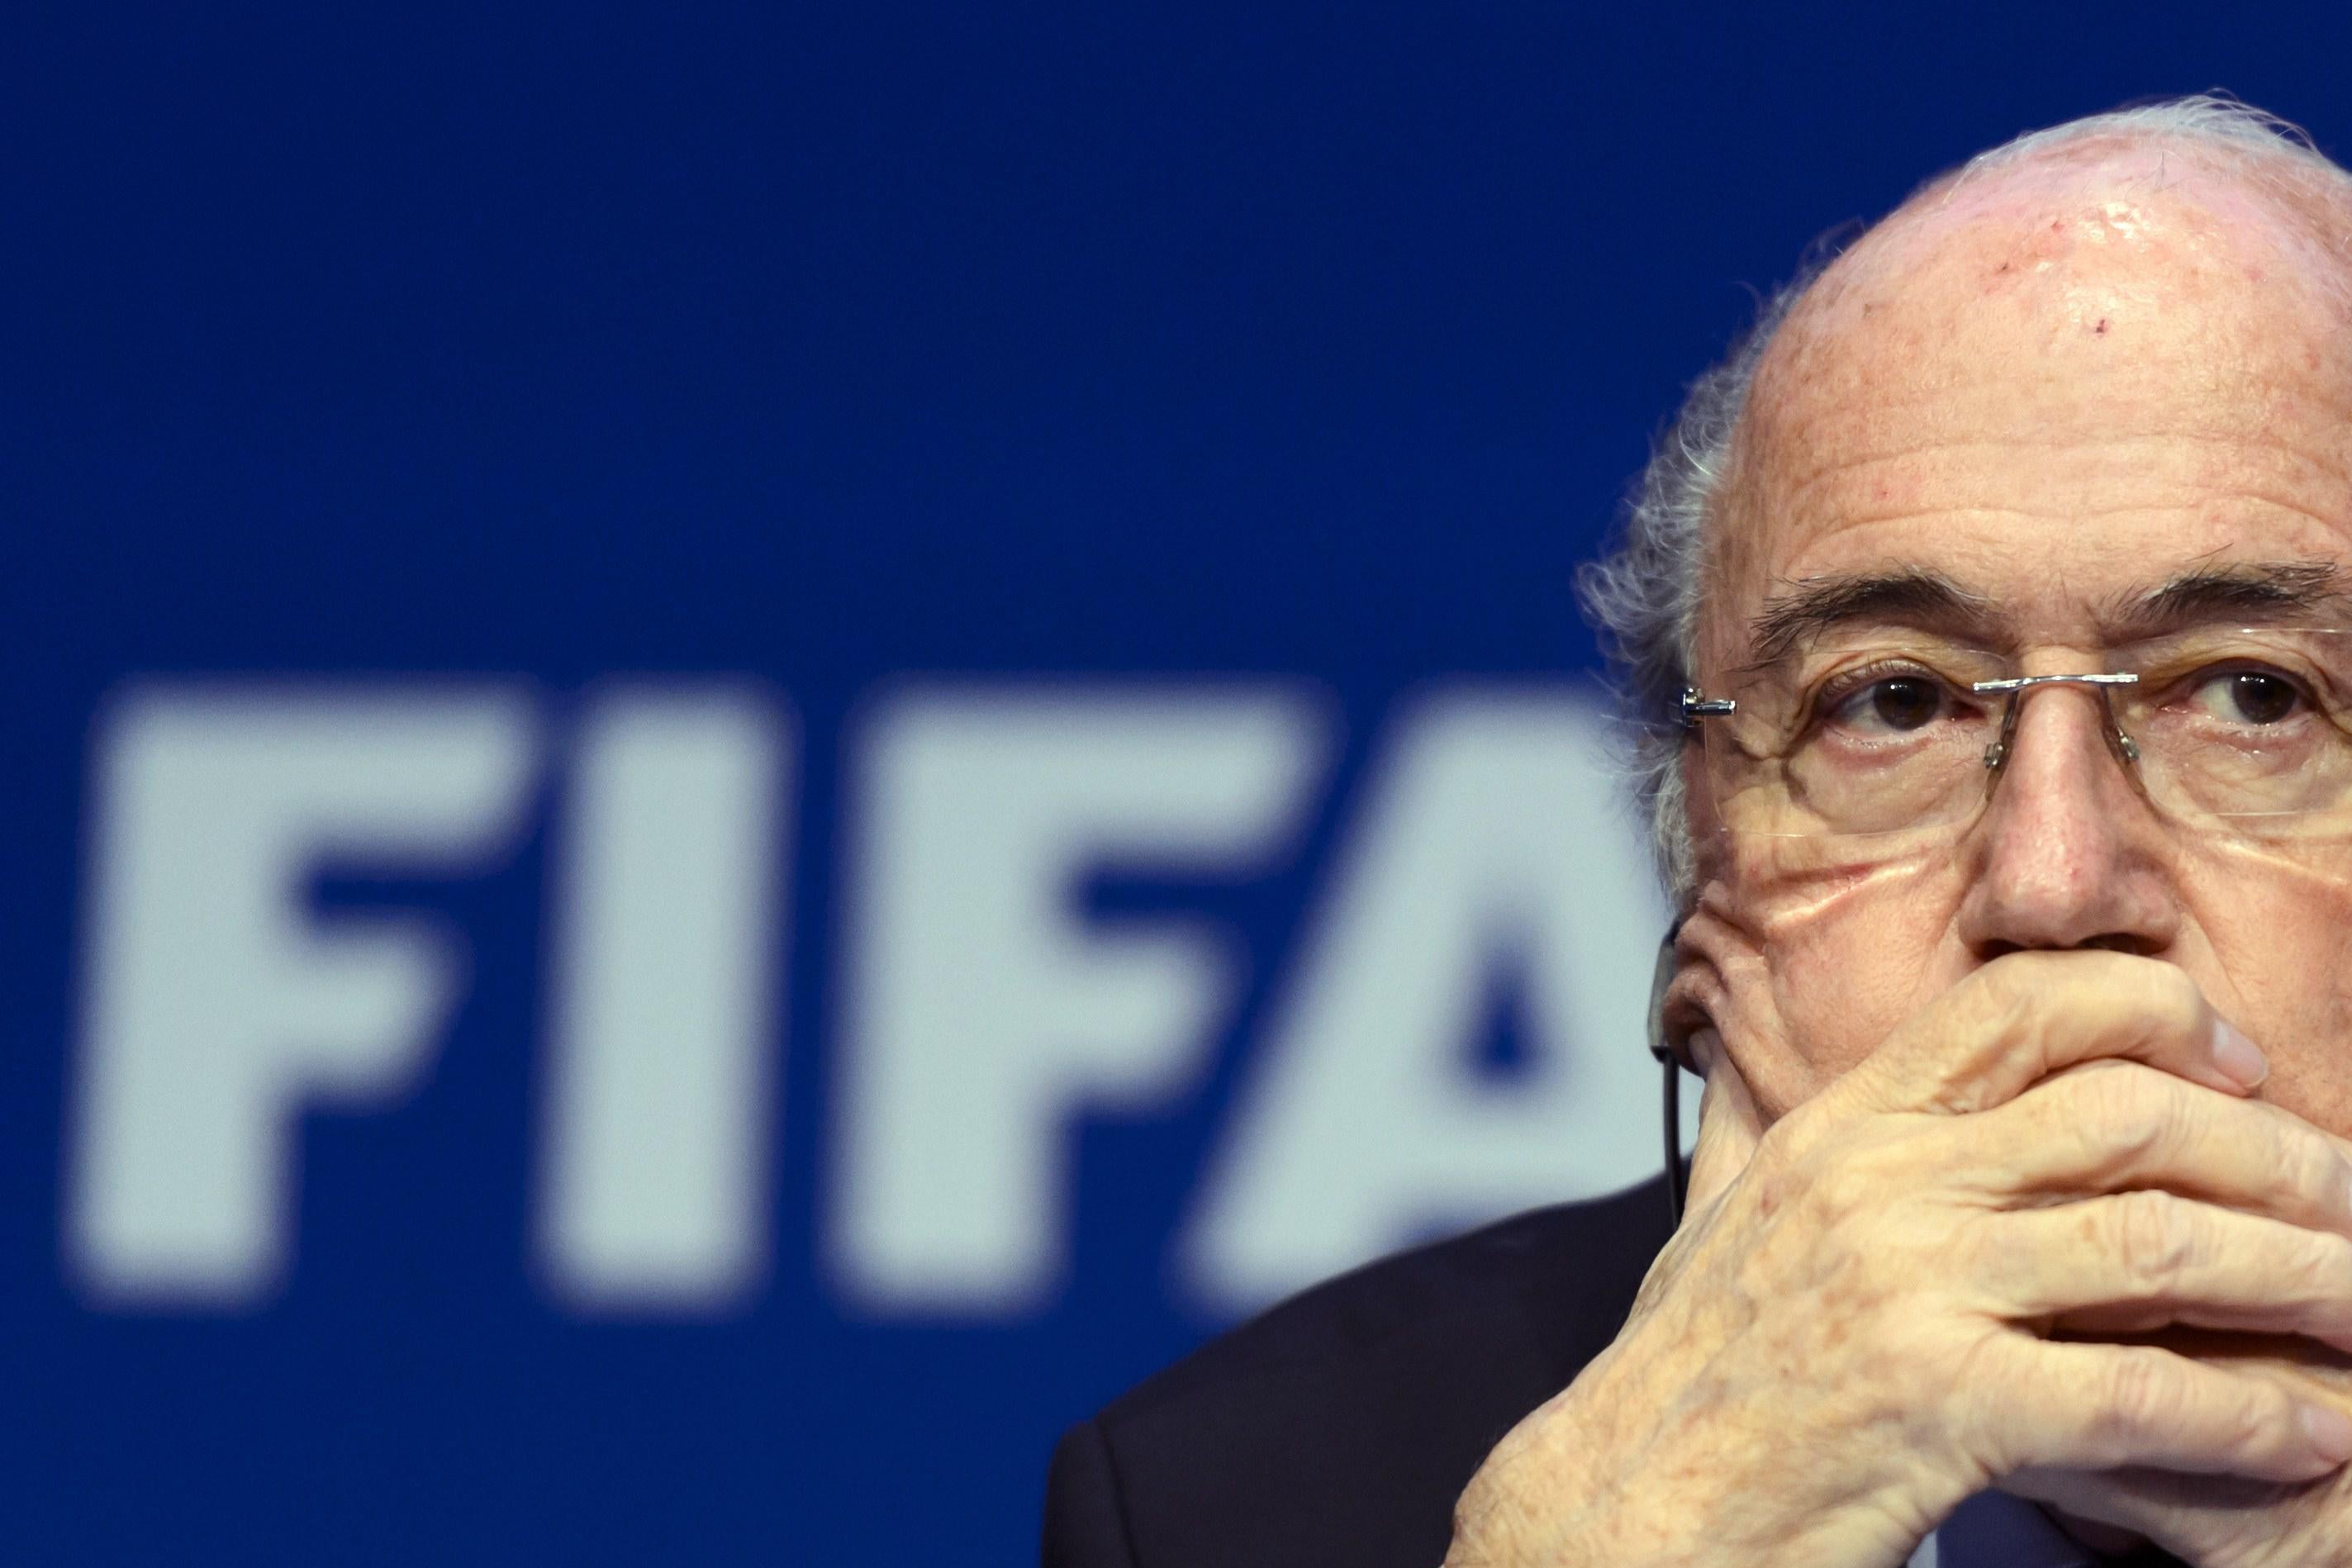 Fifa President Sepp Blatter eyes someone asking a question at the press conference with both of his hands placed over his mouth.